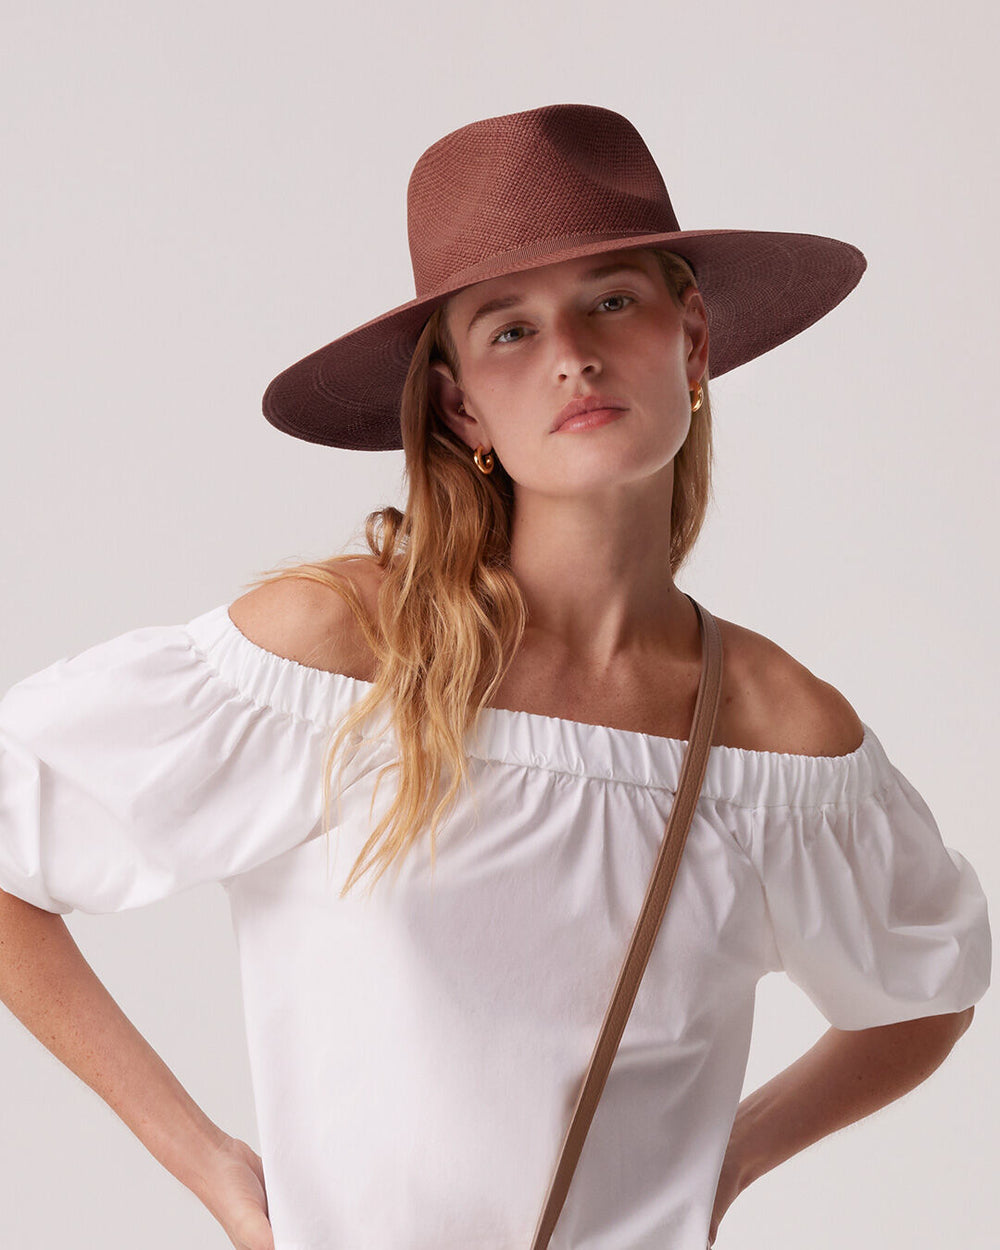 Woman in a wide-brimmed hat and off-shoulder top with a strap across the body.